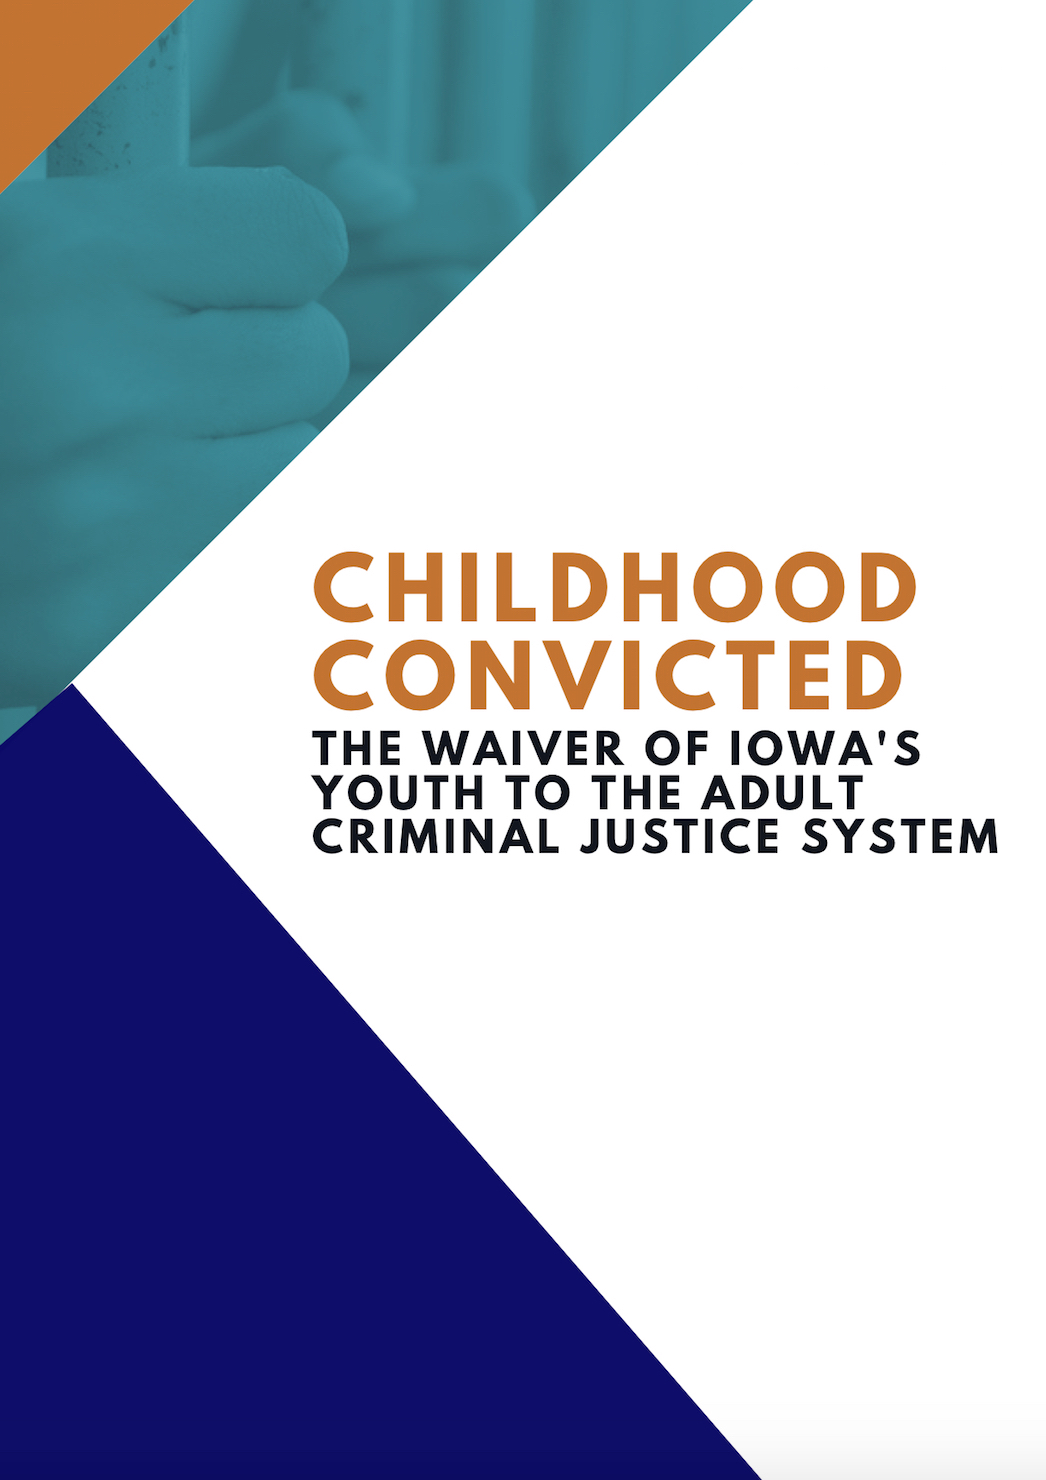 Childhood Convicted: The Waiver of Iowa's Youth to the Adult Criminal Justice System 